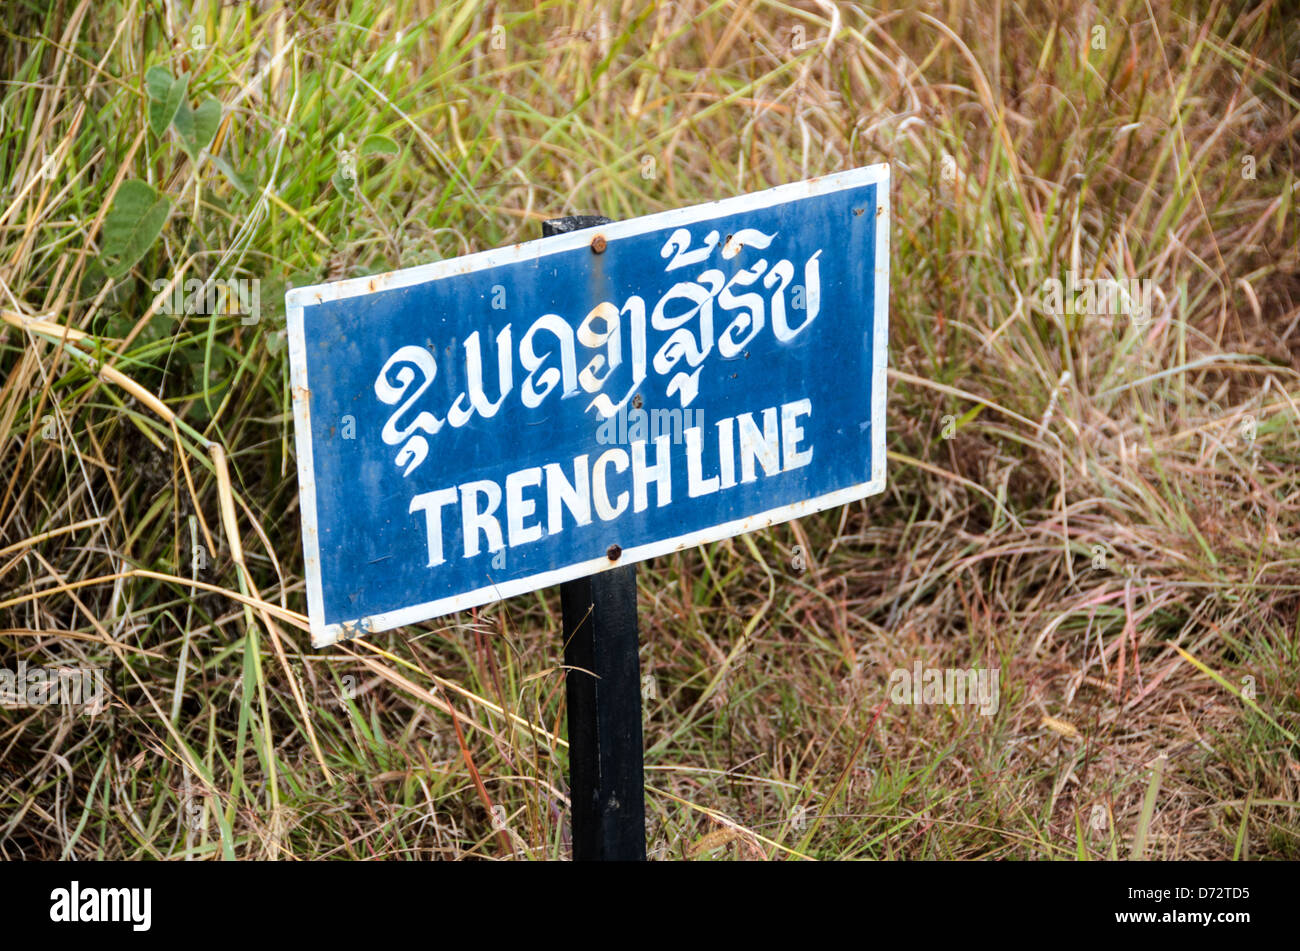 PHONSAVAN, Laos — A sign marking a trench line from bomb craters at Site 1 in the Plain of Jars, Laos. The US bombing campaign from 1964 through 1973 left this region pockmarked with bomb craters. Stock Photo